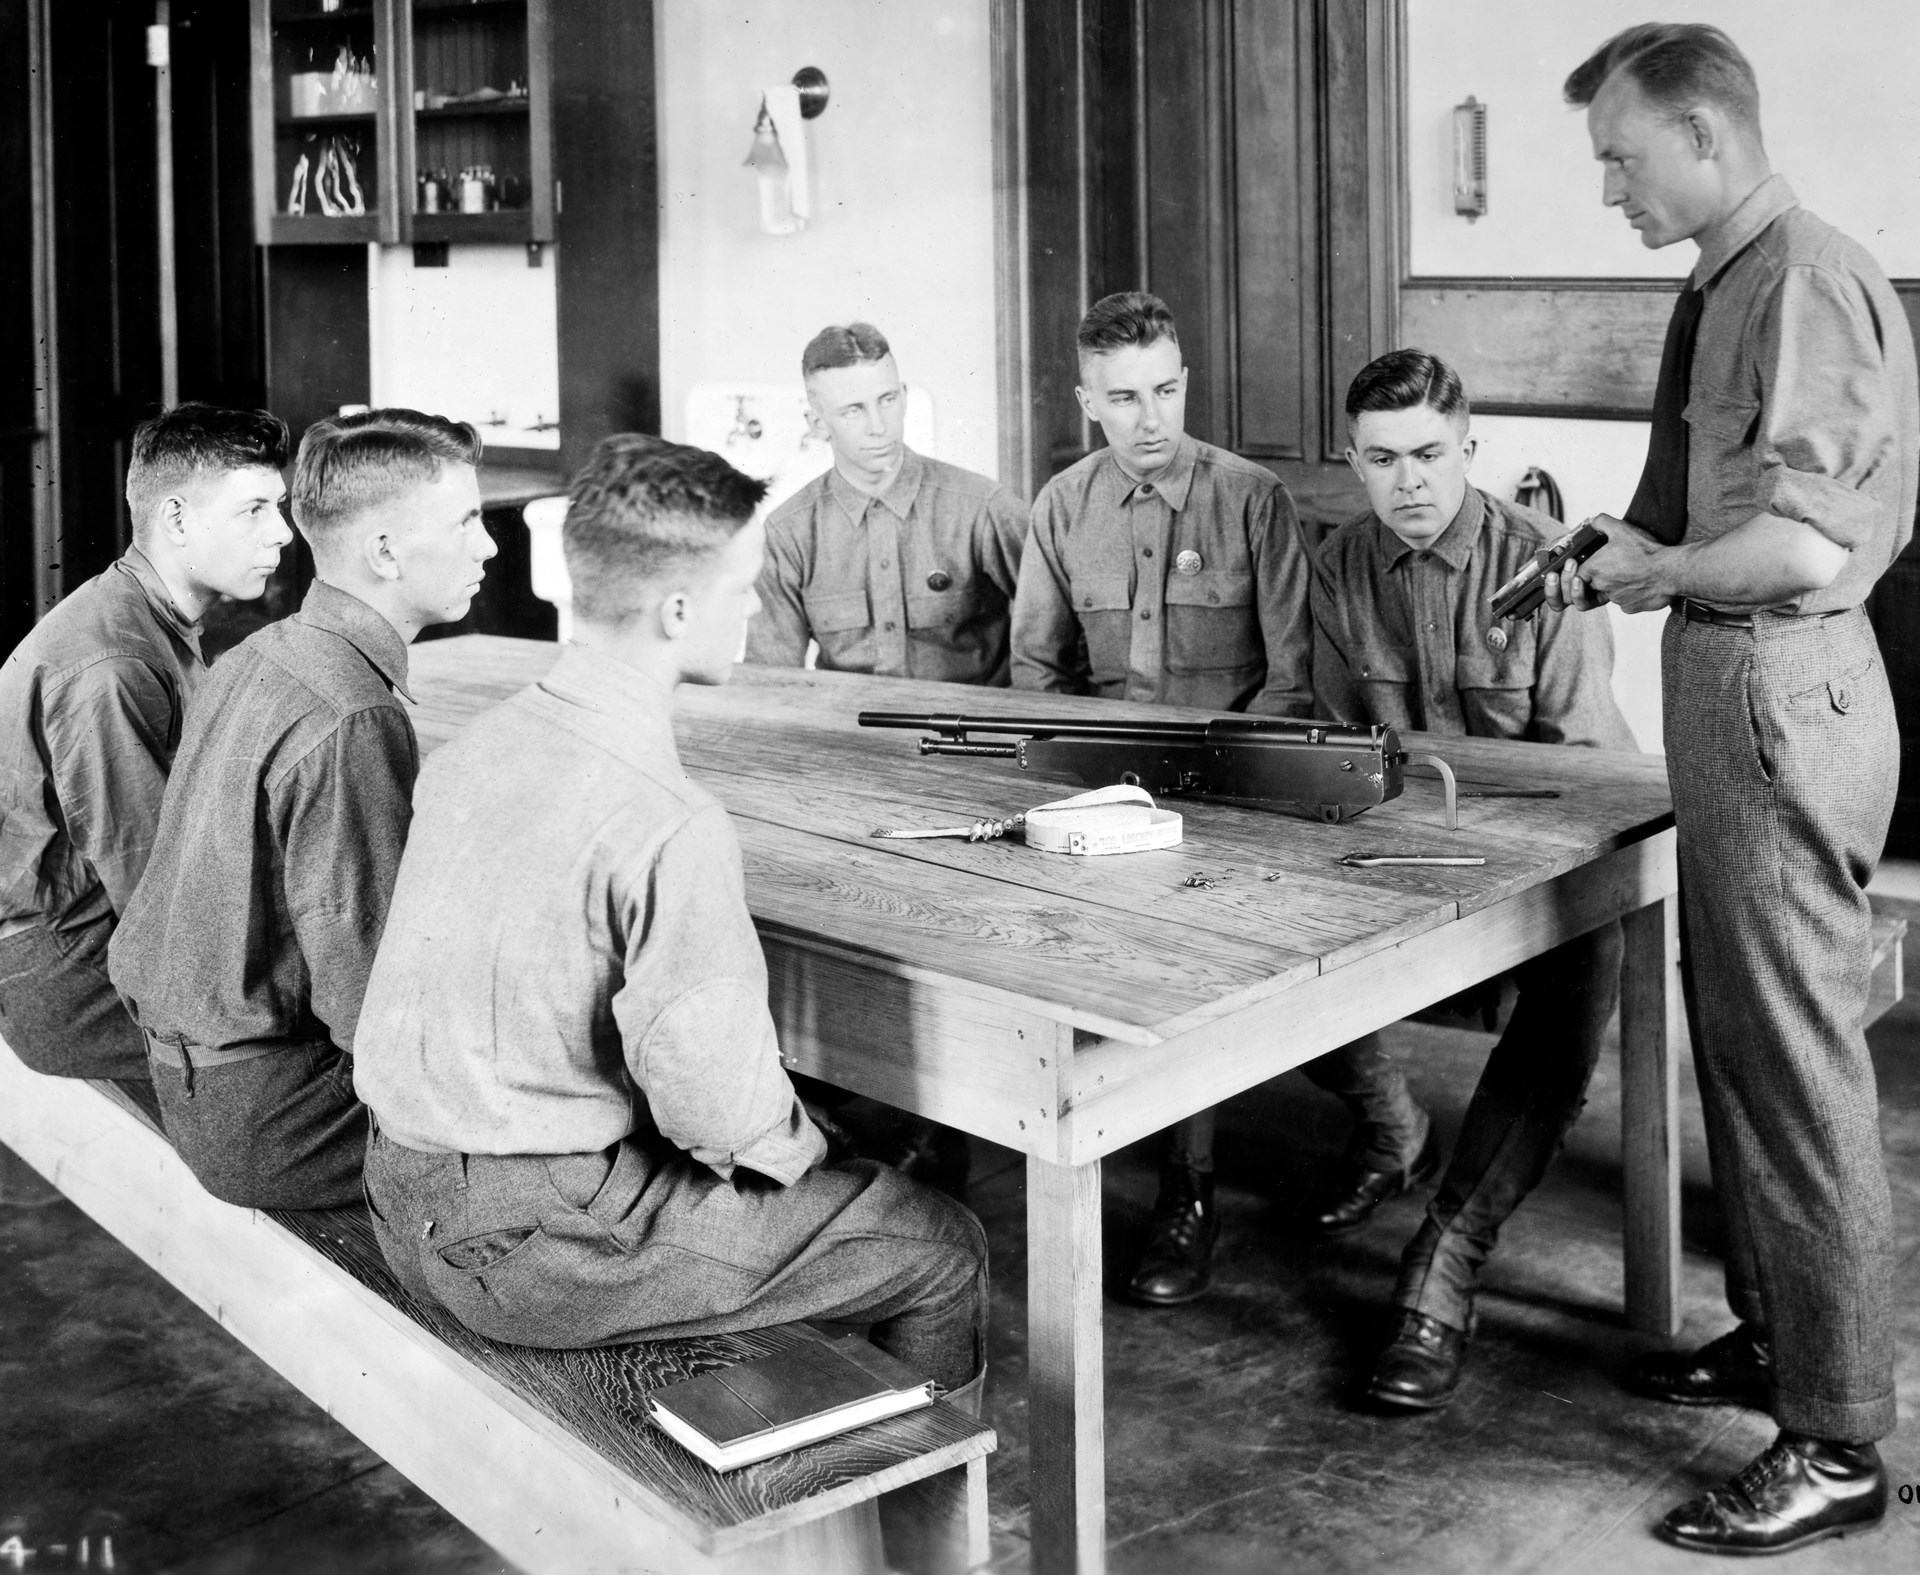 Learning the nuances of an aircraft machine gun: Aviation cadets at Princeton observe the workings of the Marlin aircraft machine gun. N.A.R.A. photograph.